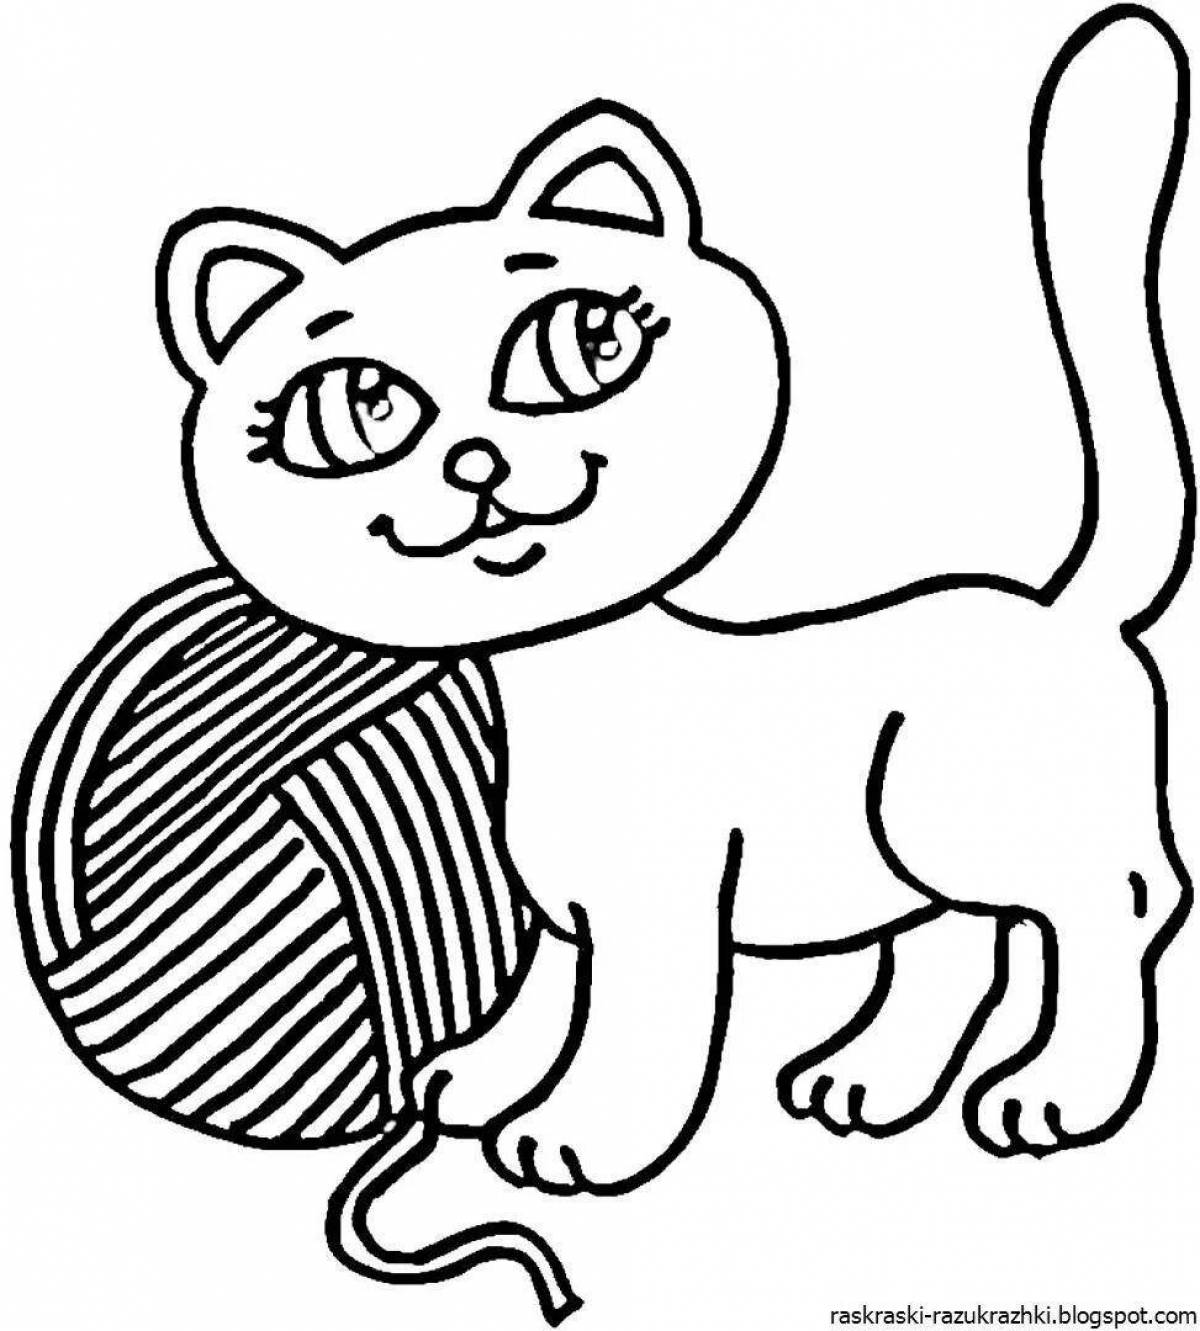 Fun coloring cat for children 2-3 years old